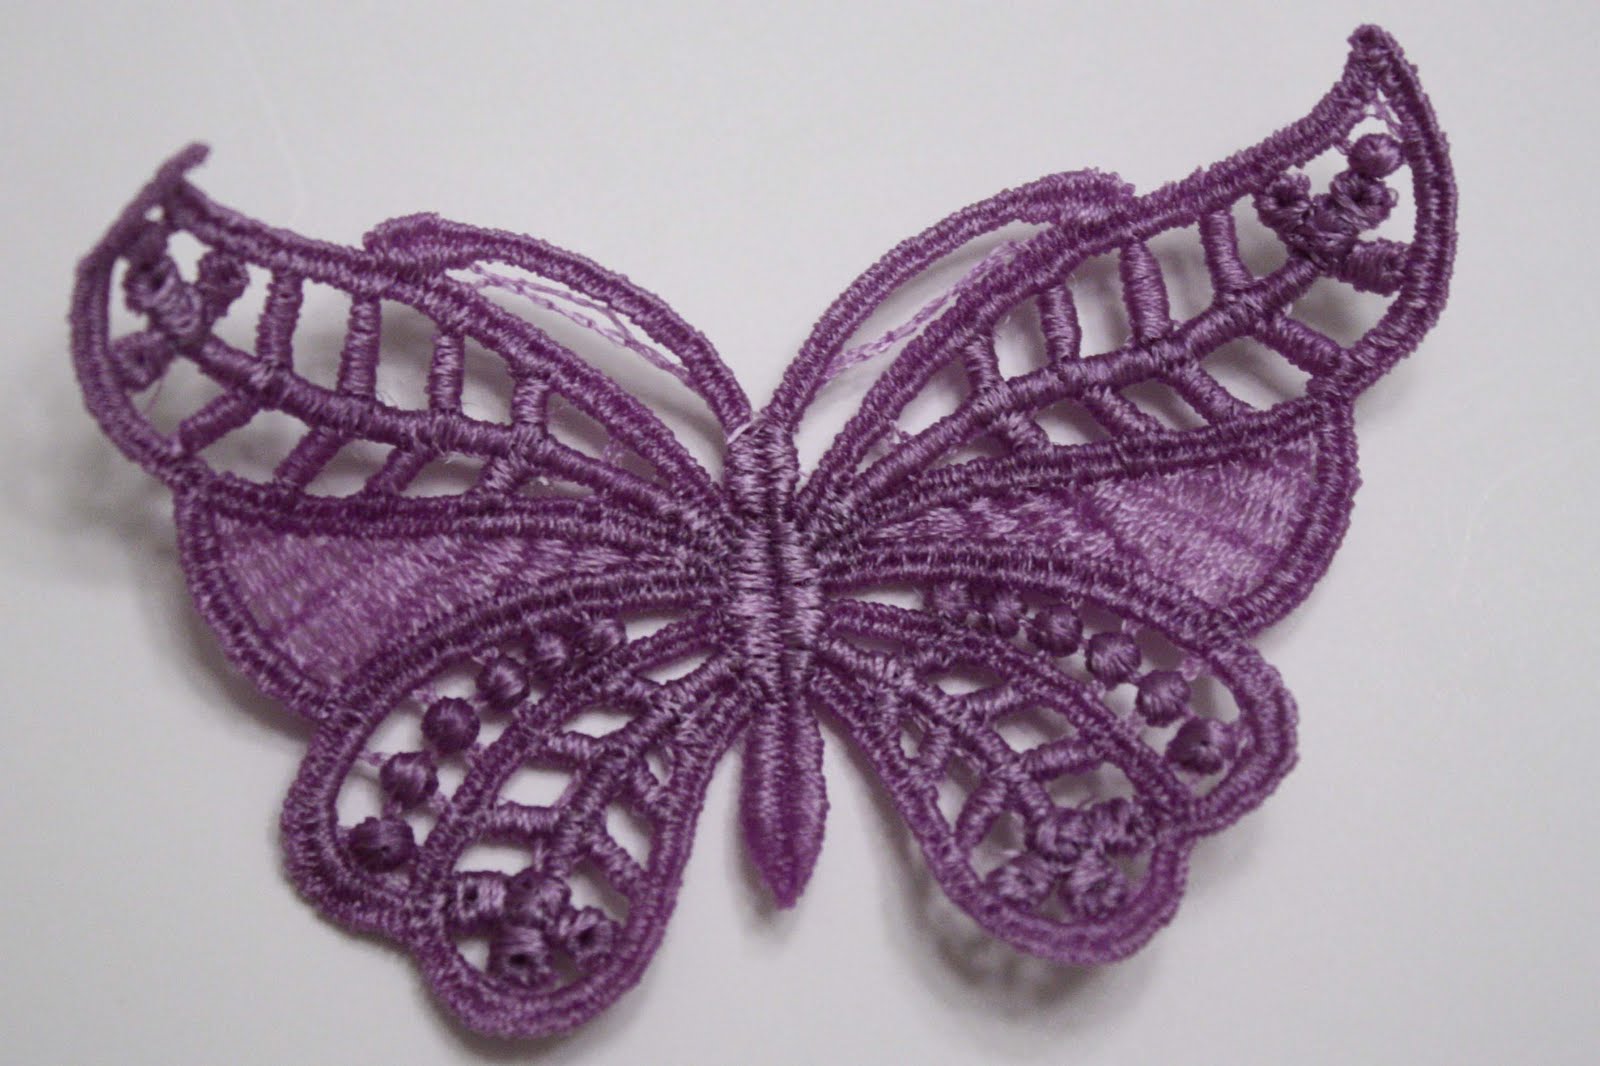 How to Machine Embroider Lace Designs - Sewing - Learn How to Sew